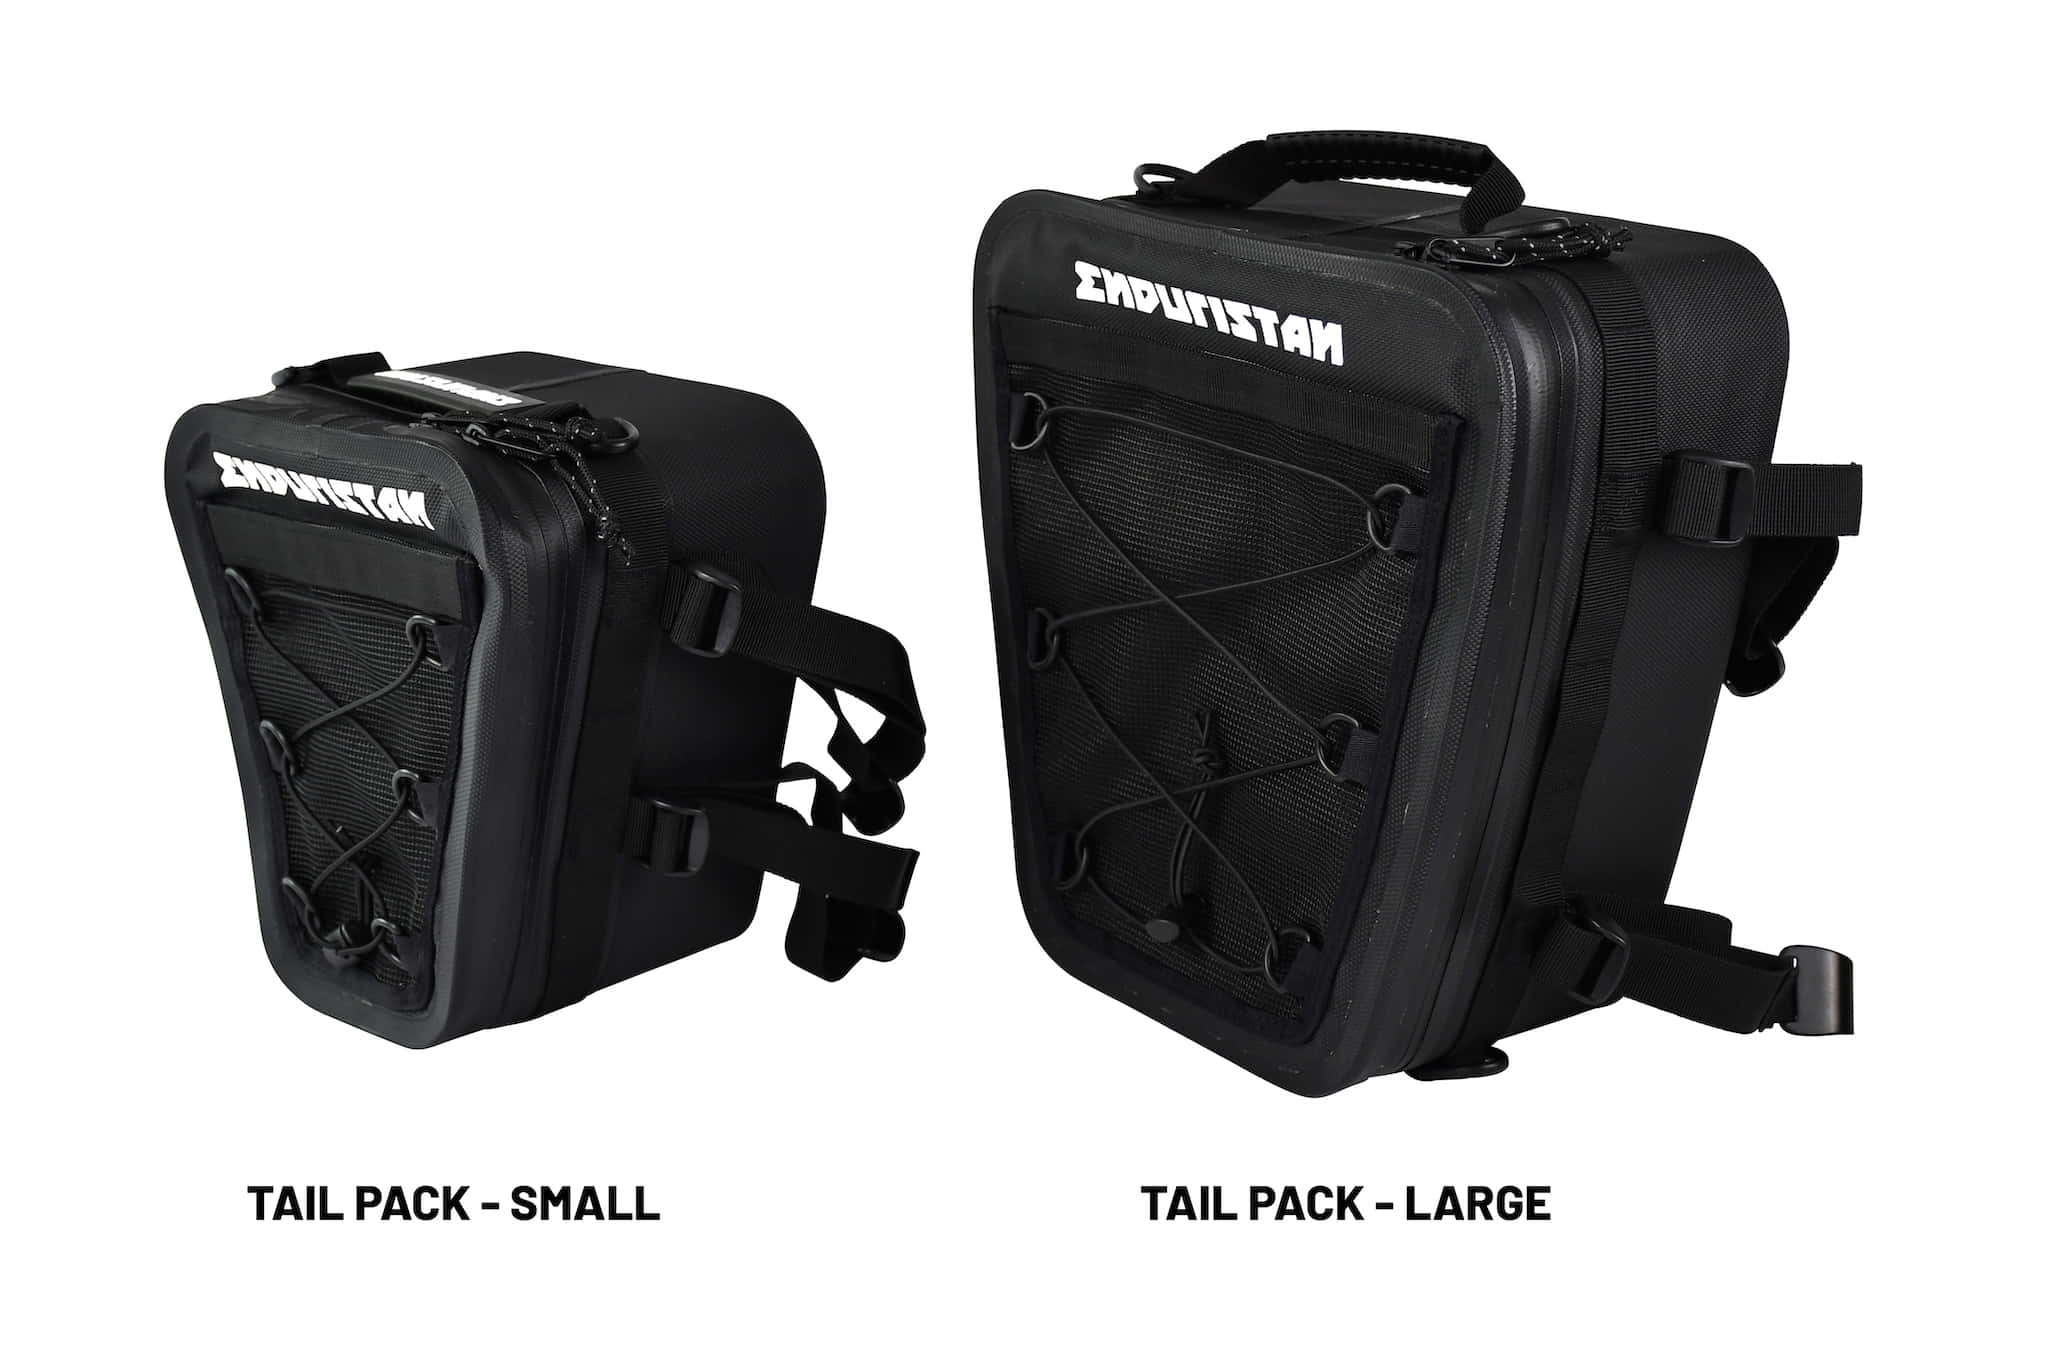 Tail Pack